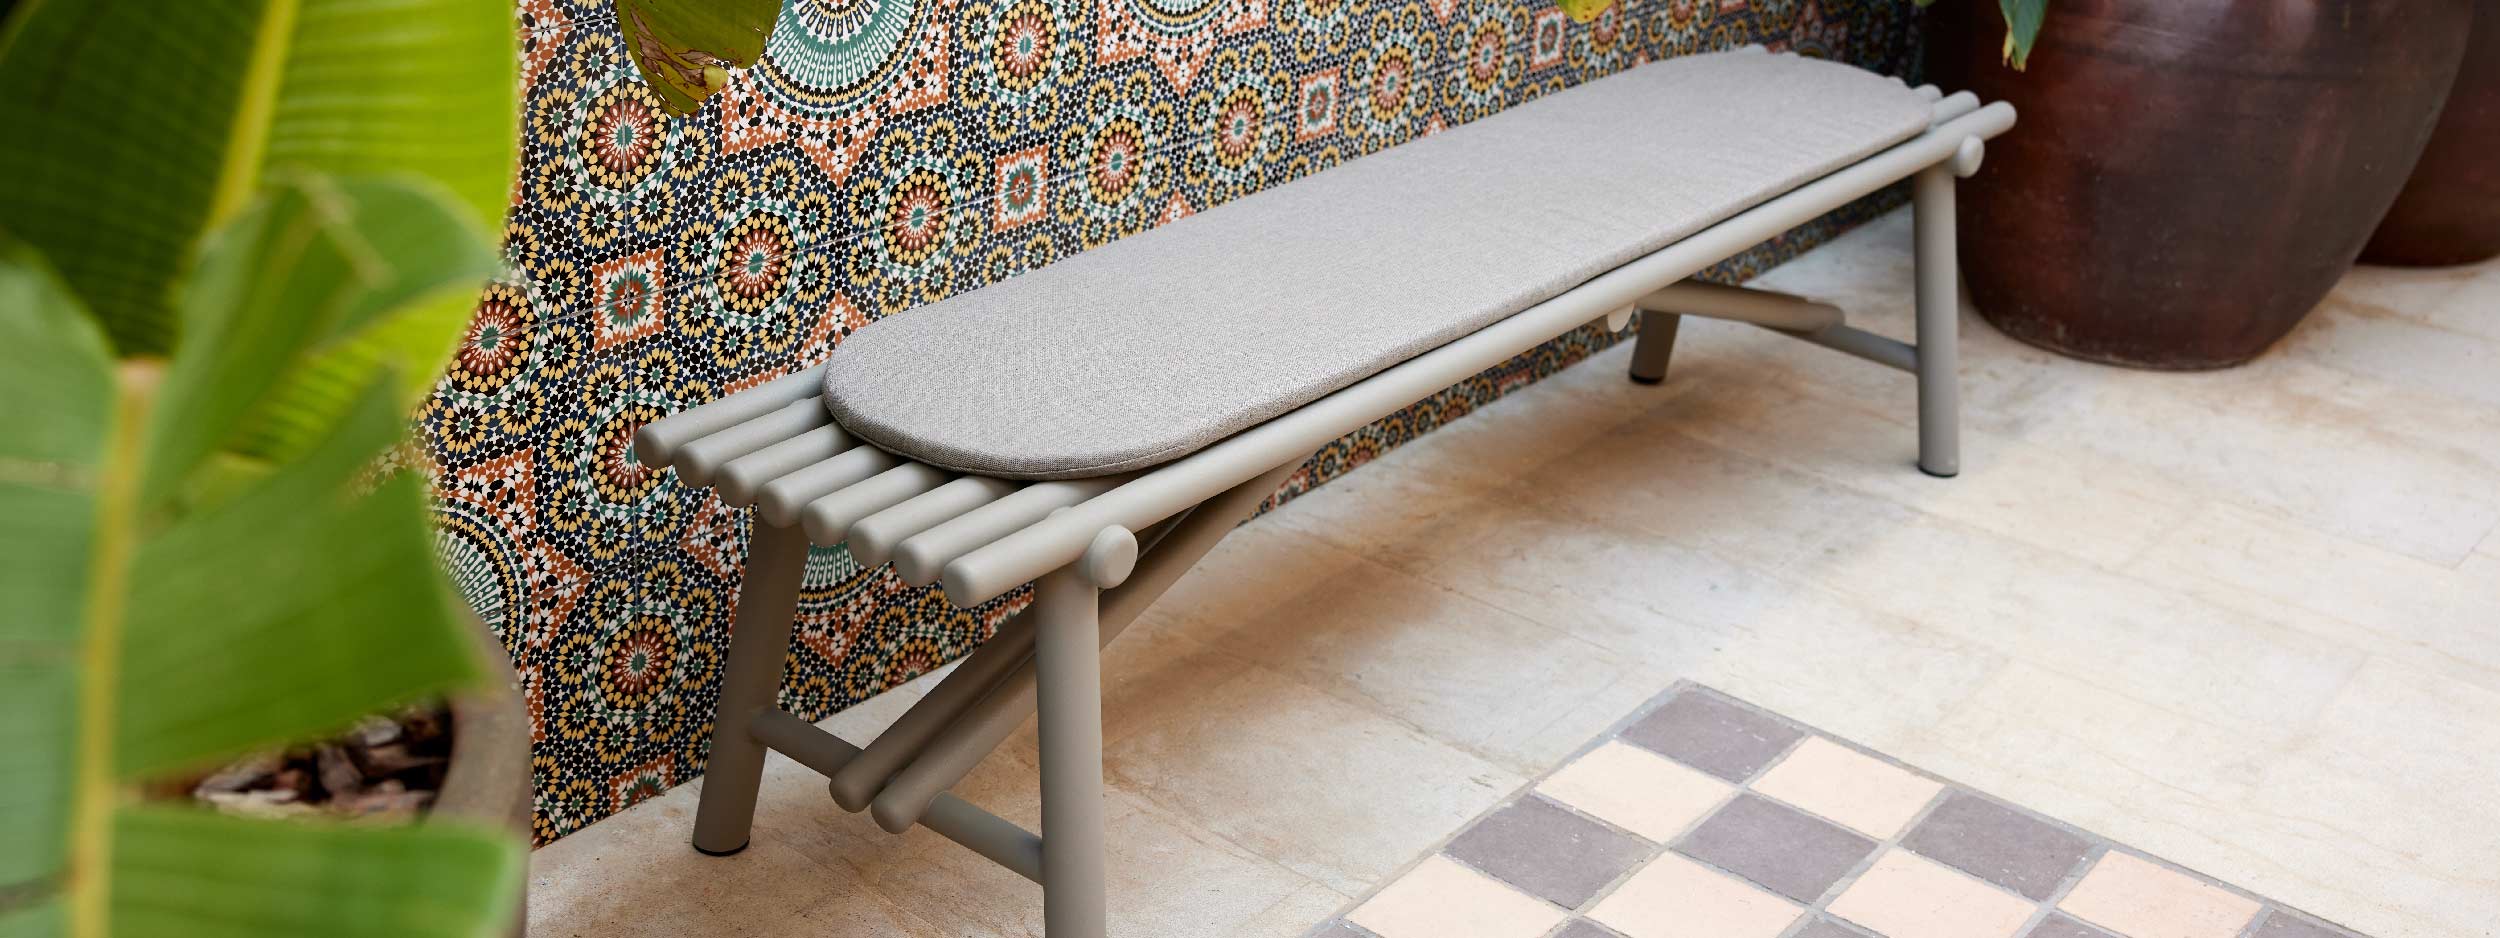 Image of Sticks garden bench seat and snug cushion with colourful Moroccan-inspired tiles in the background